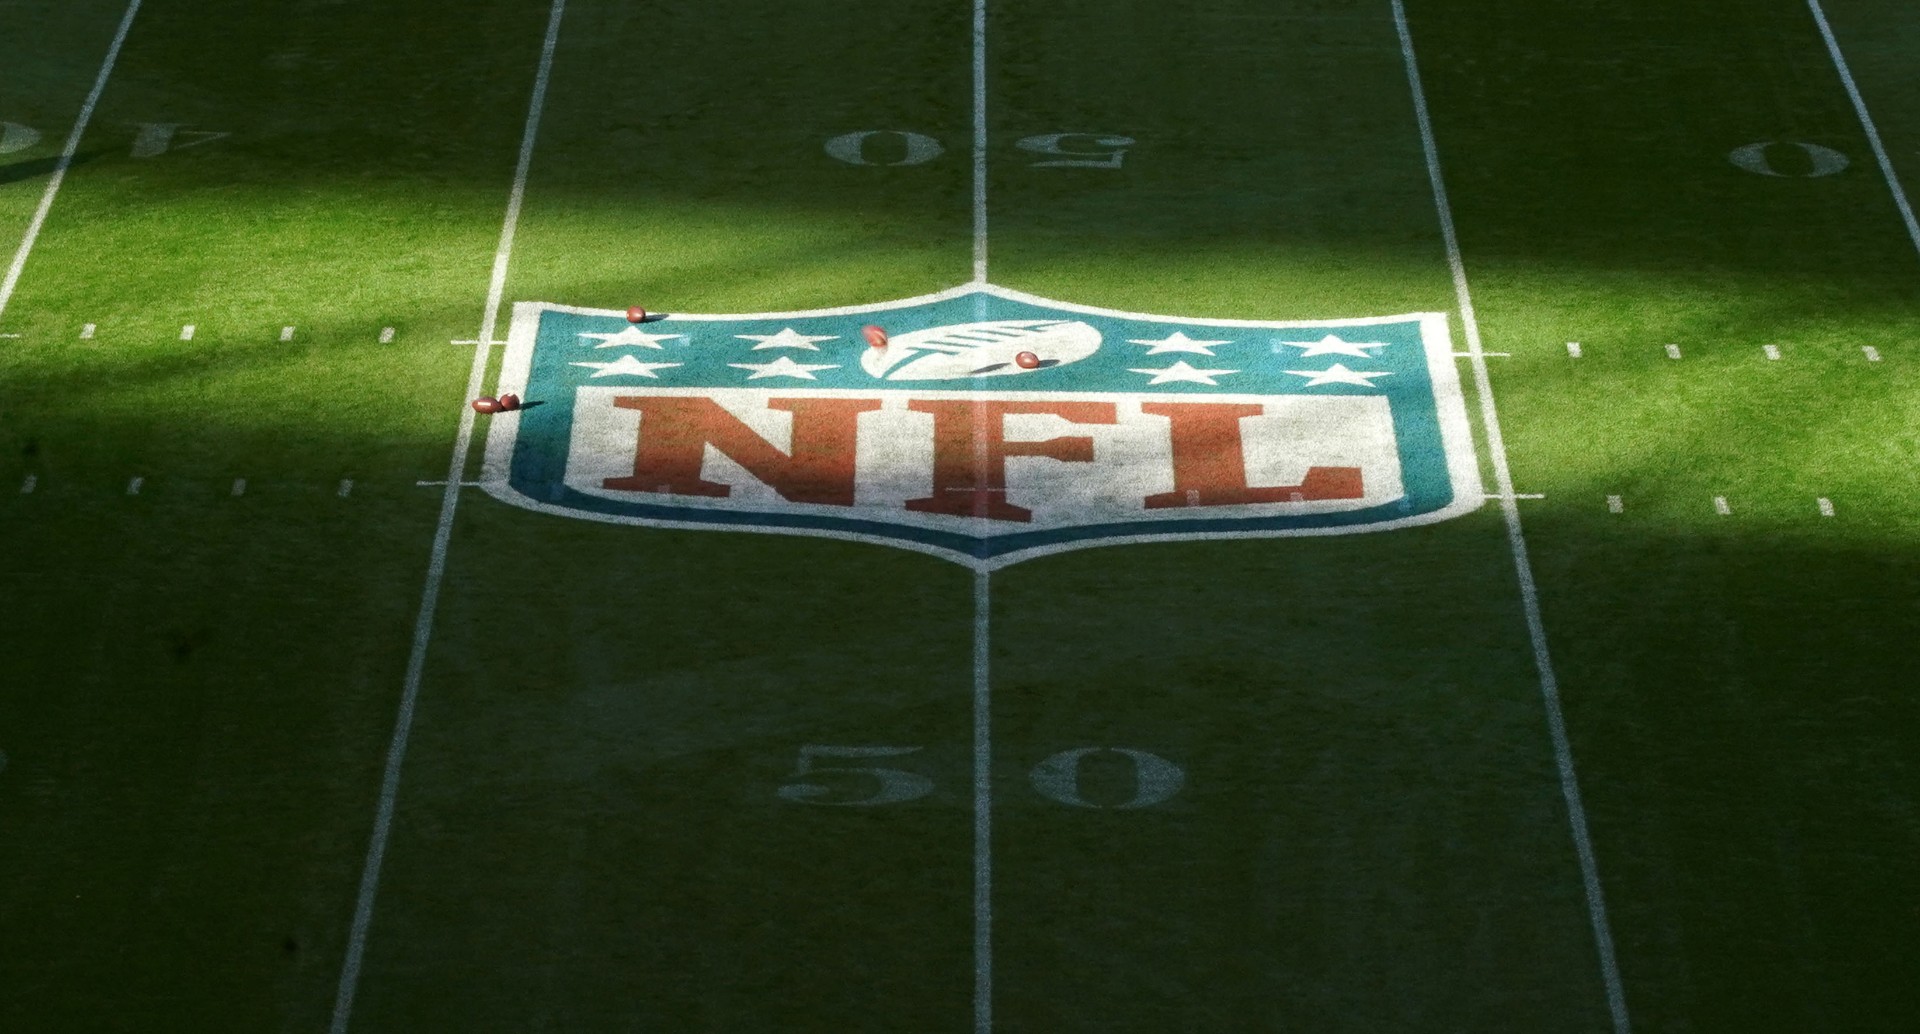 NFL Announces Fineable Violations for ‘High Risk COVID-19 Conduct' Including Night Clubs